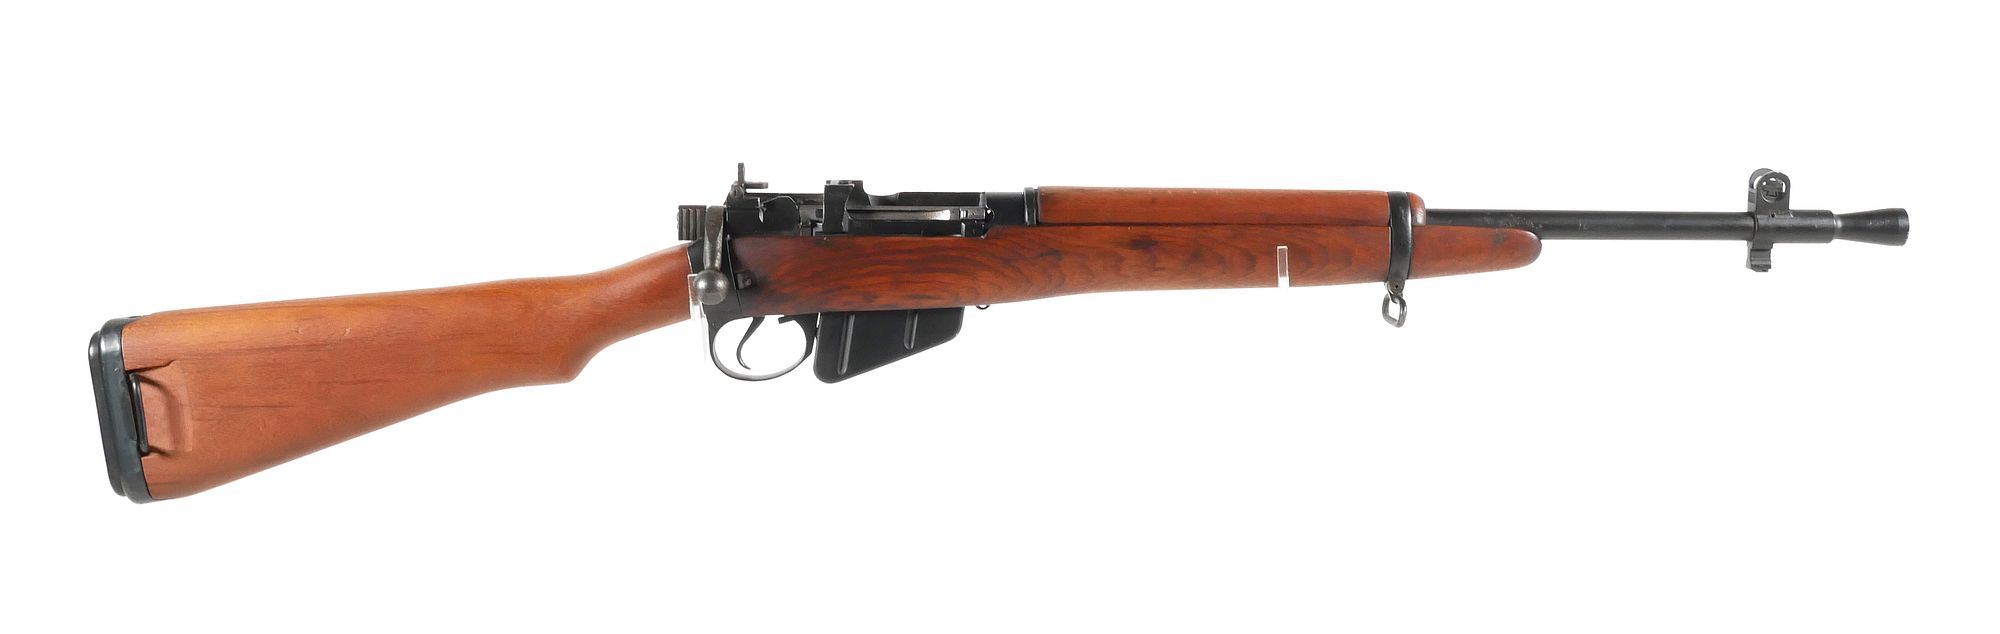 British LEE-ENFIELD No4 Mk 1 Sporterized 303 sold at auction on